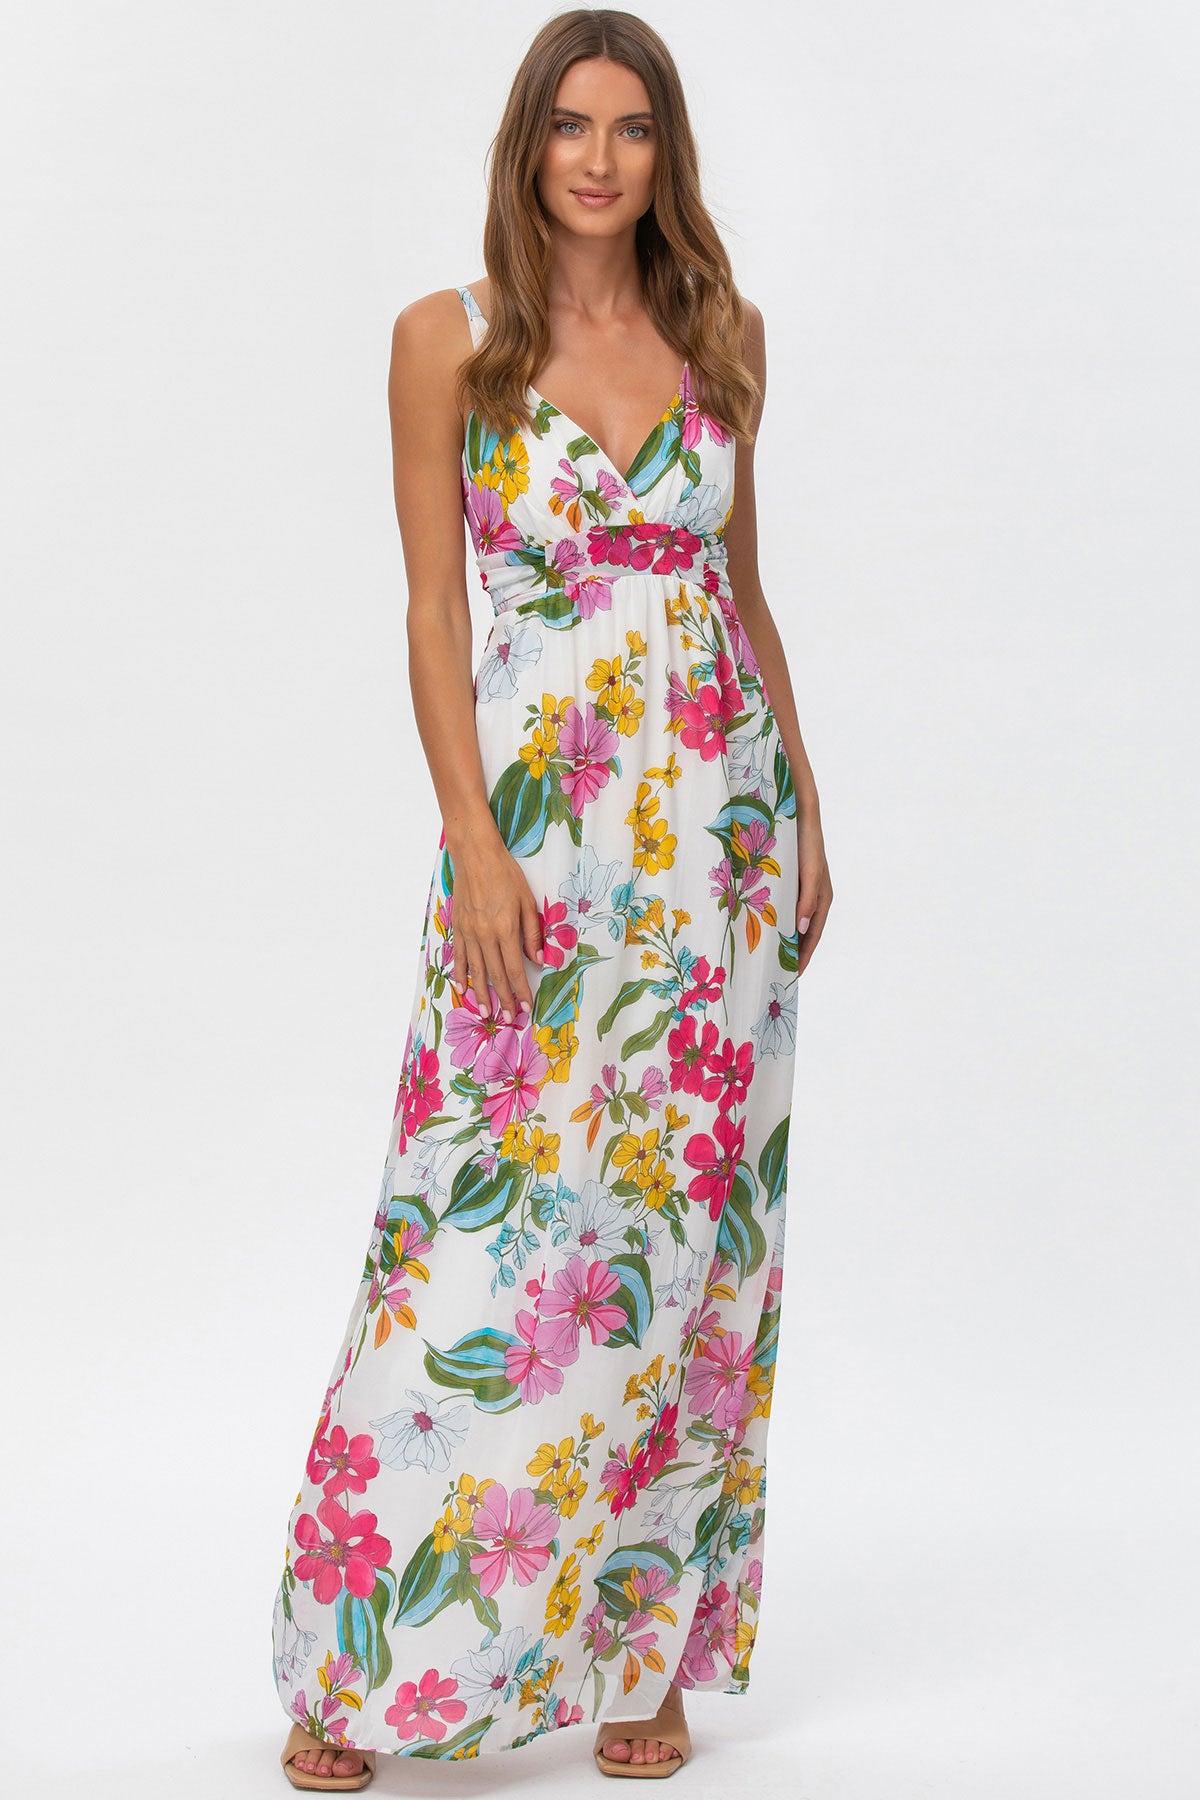 MURANO | Maternity Maxi Dress for Ceremony with Botanical Eden Print